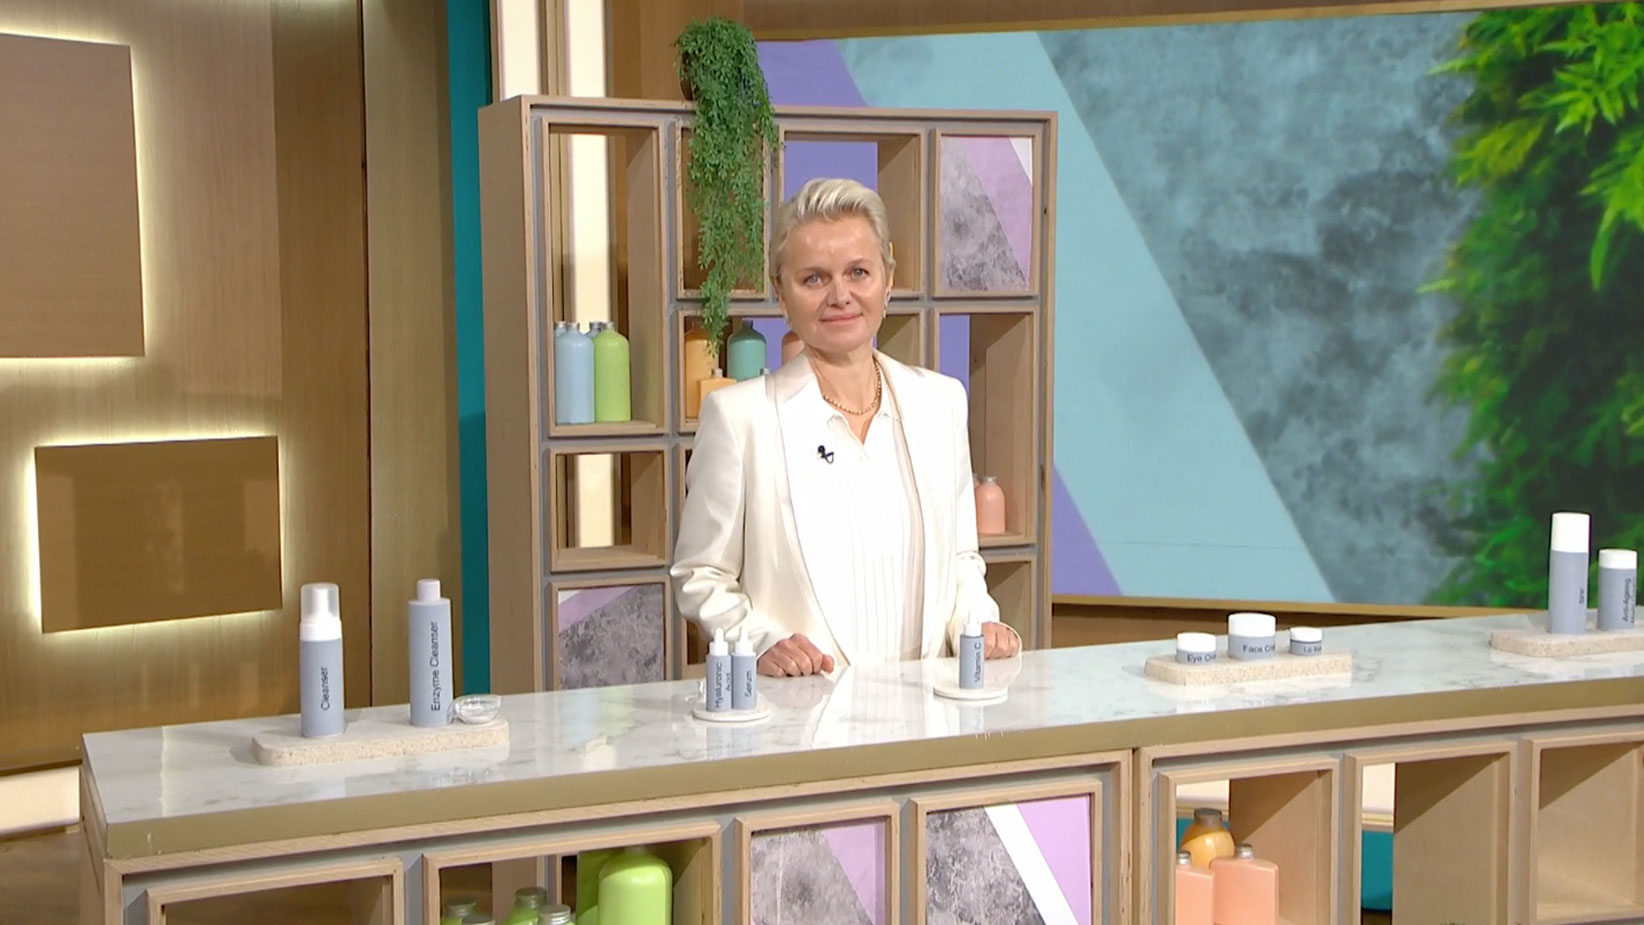 Hollywood anti-aging masterclass | This Morning